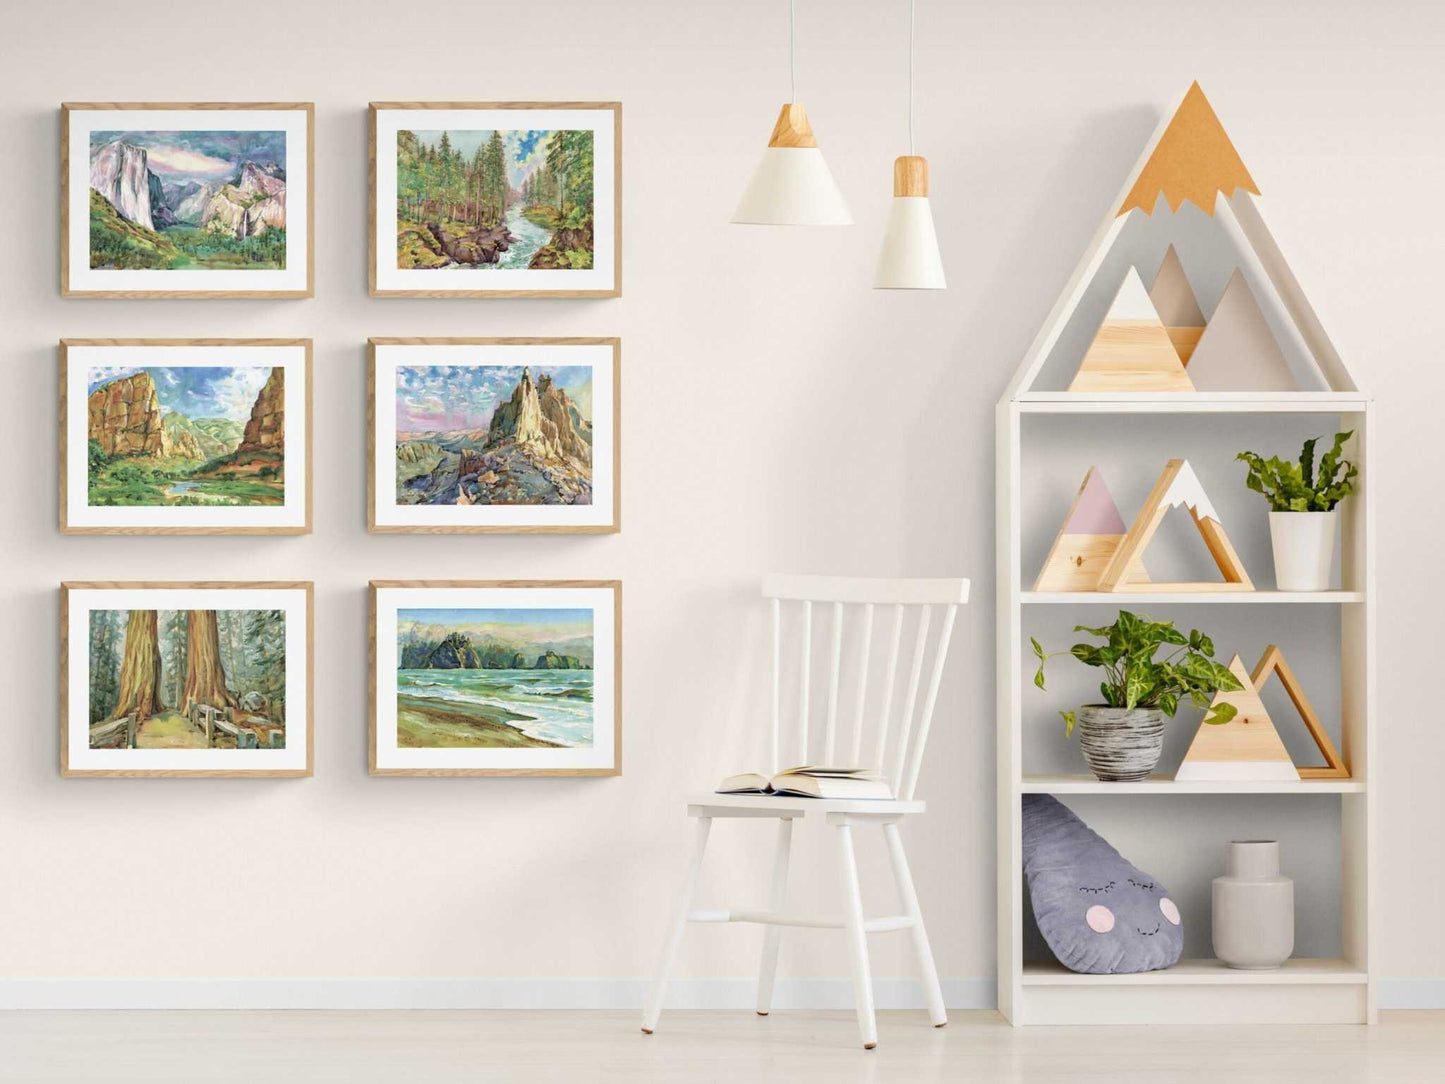 Zion National Park Giclée Art PrintBring the natural breathtaking views of America's National Parks into your home with these giclée prints of original artist watercolor paintings. The subtle and natu